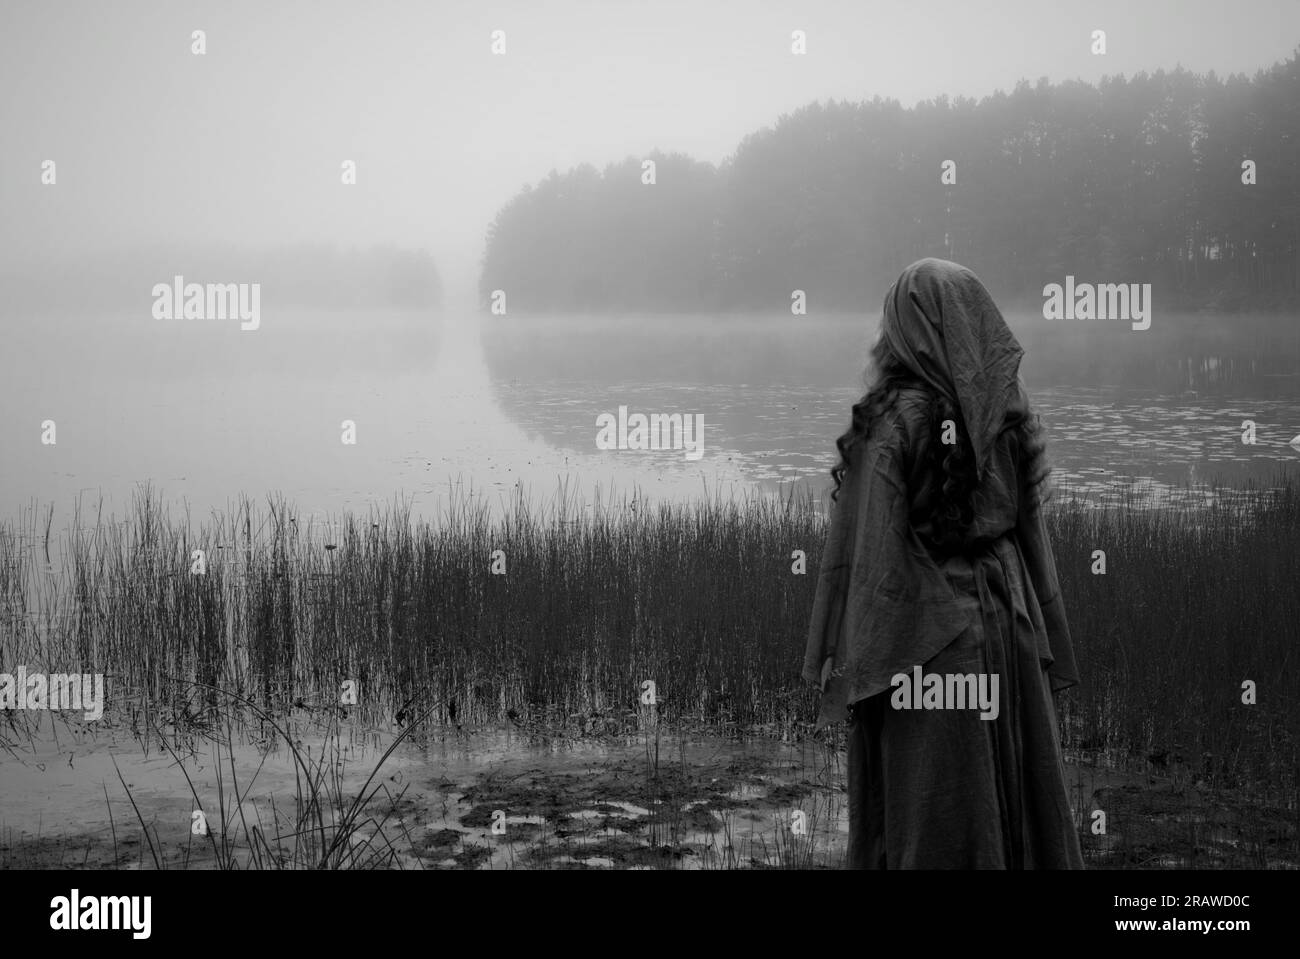 Medieval woman looking out over foggy lake. Mood of photo evokes old norse or pagan goddess worship. Stock Photo